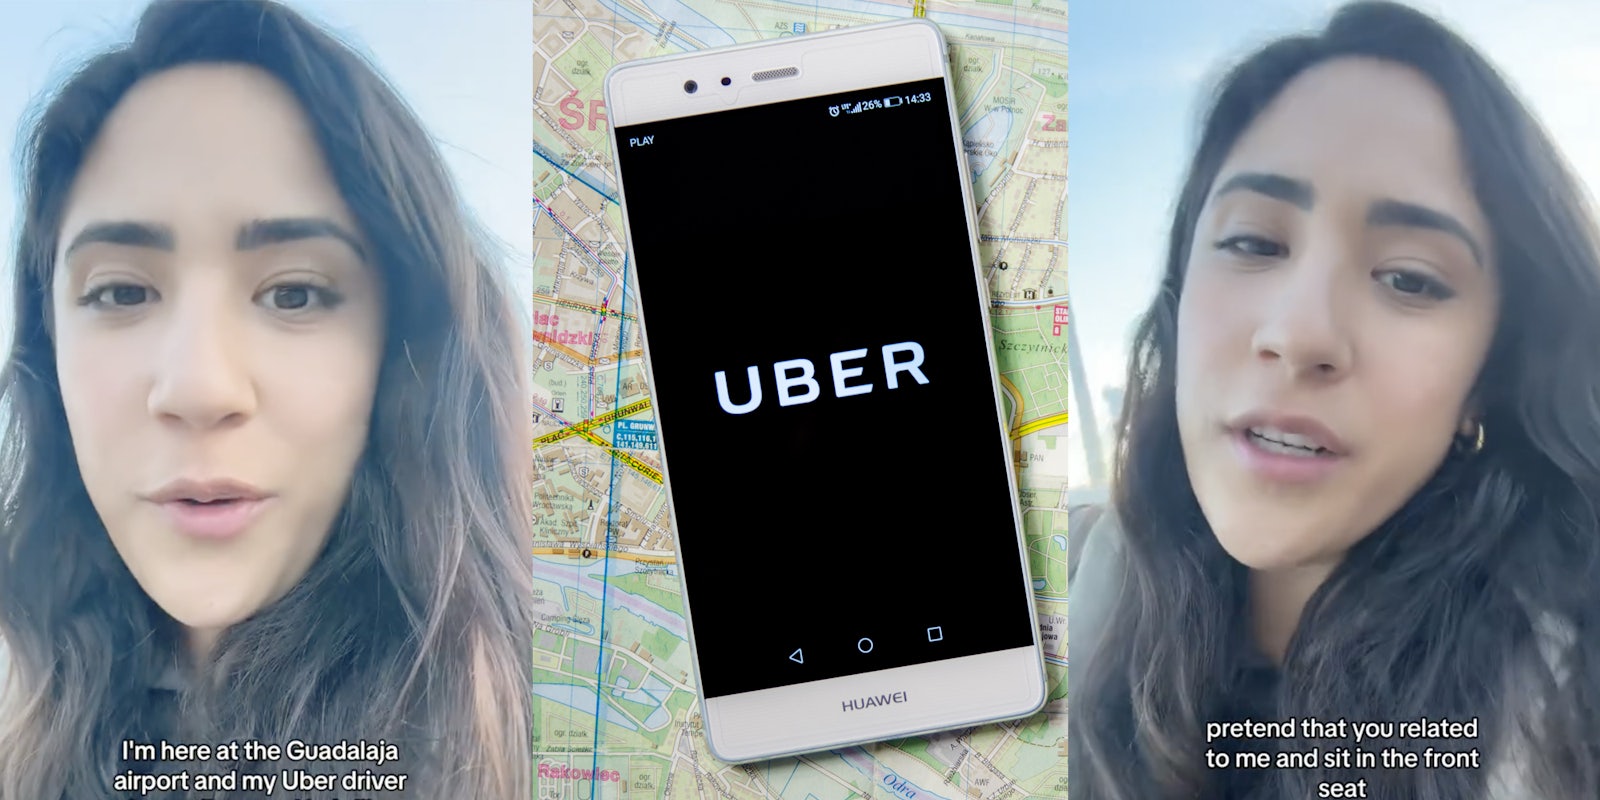 Woman talking to camera(l+r), Uber app on phone on top of map(c)